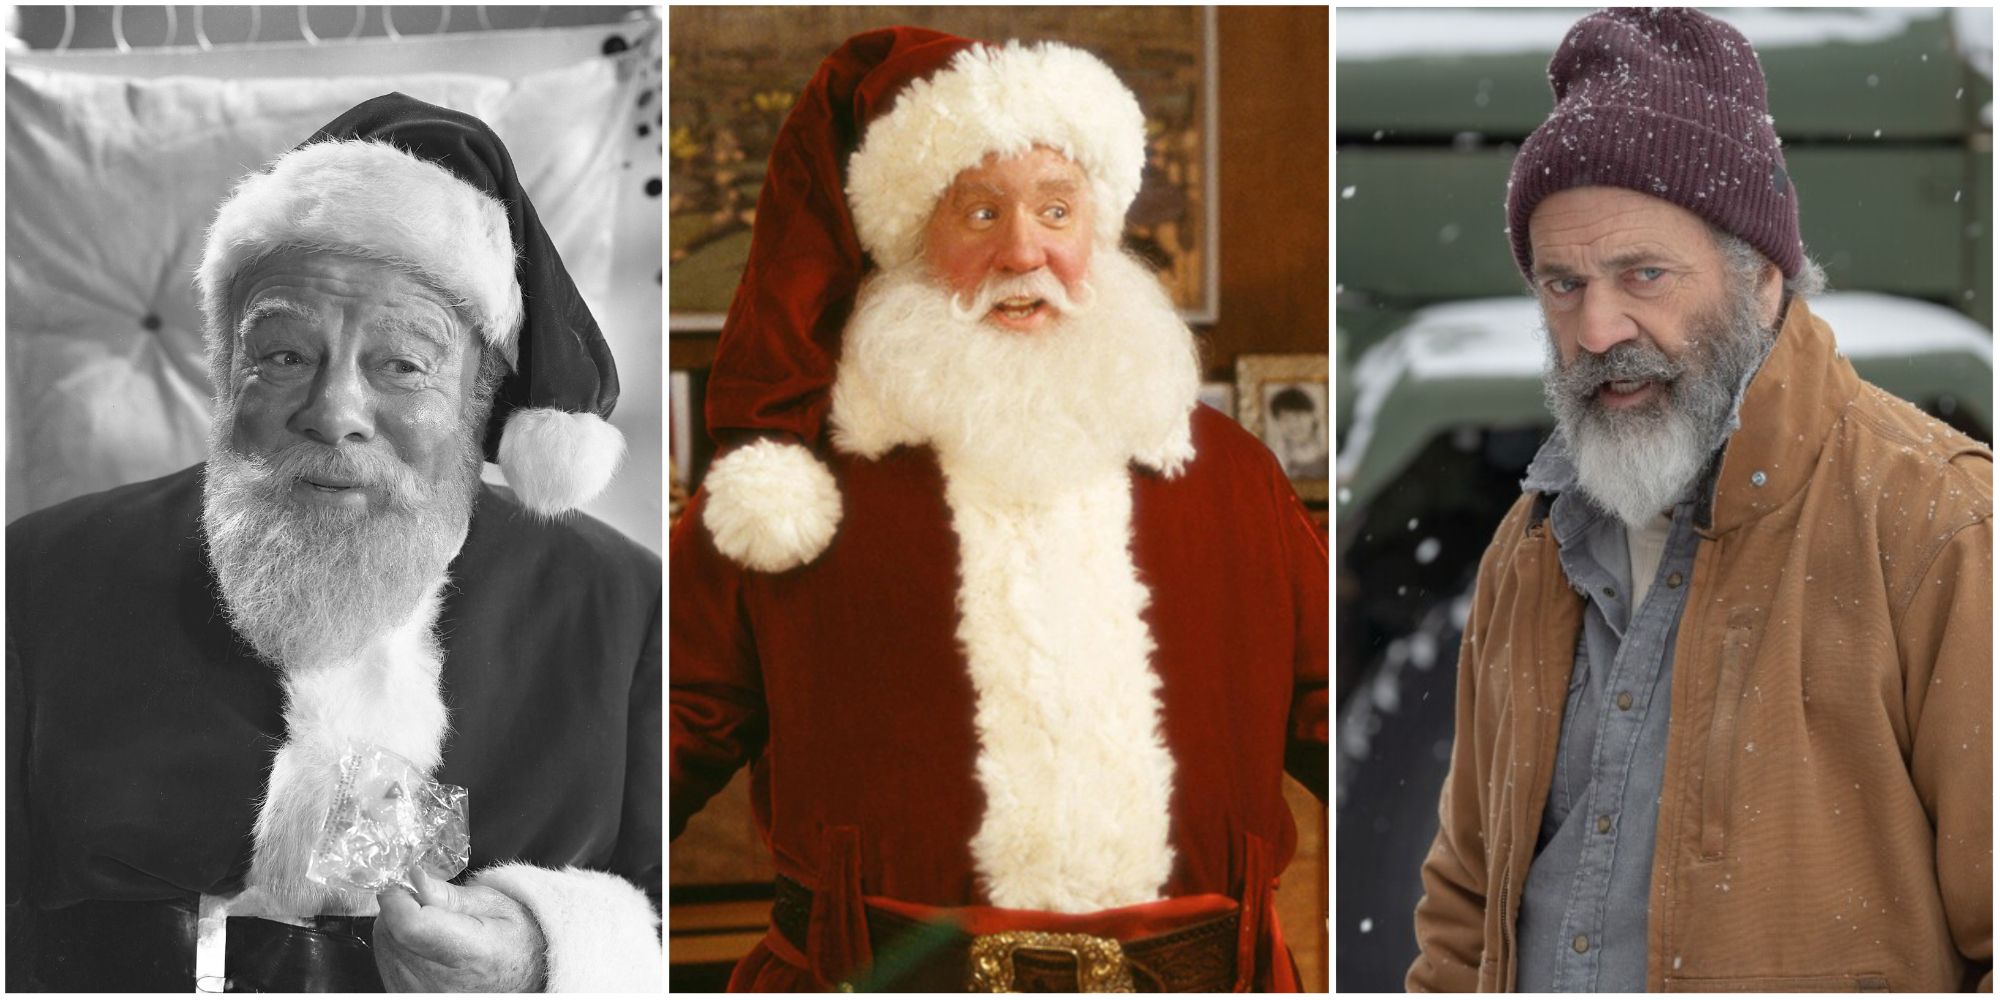 Santa in The Santa Clause, Miracle on 34th Street, and Fatman